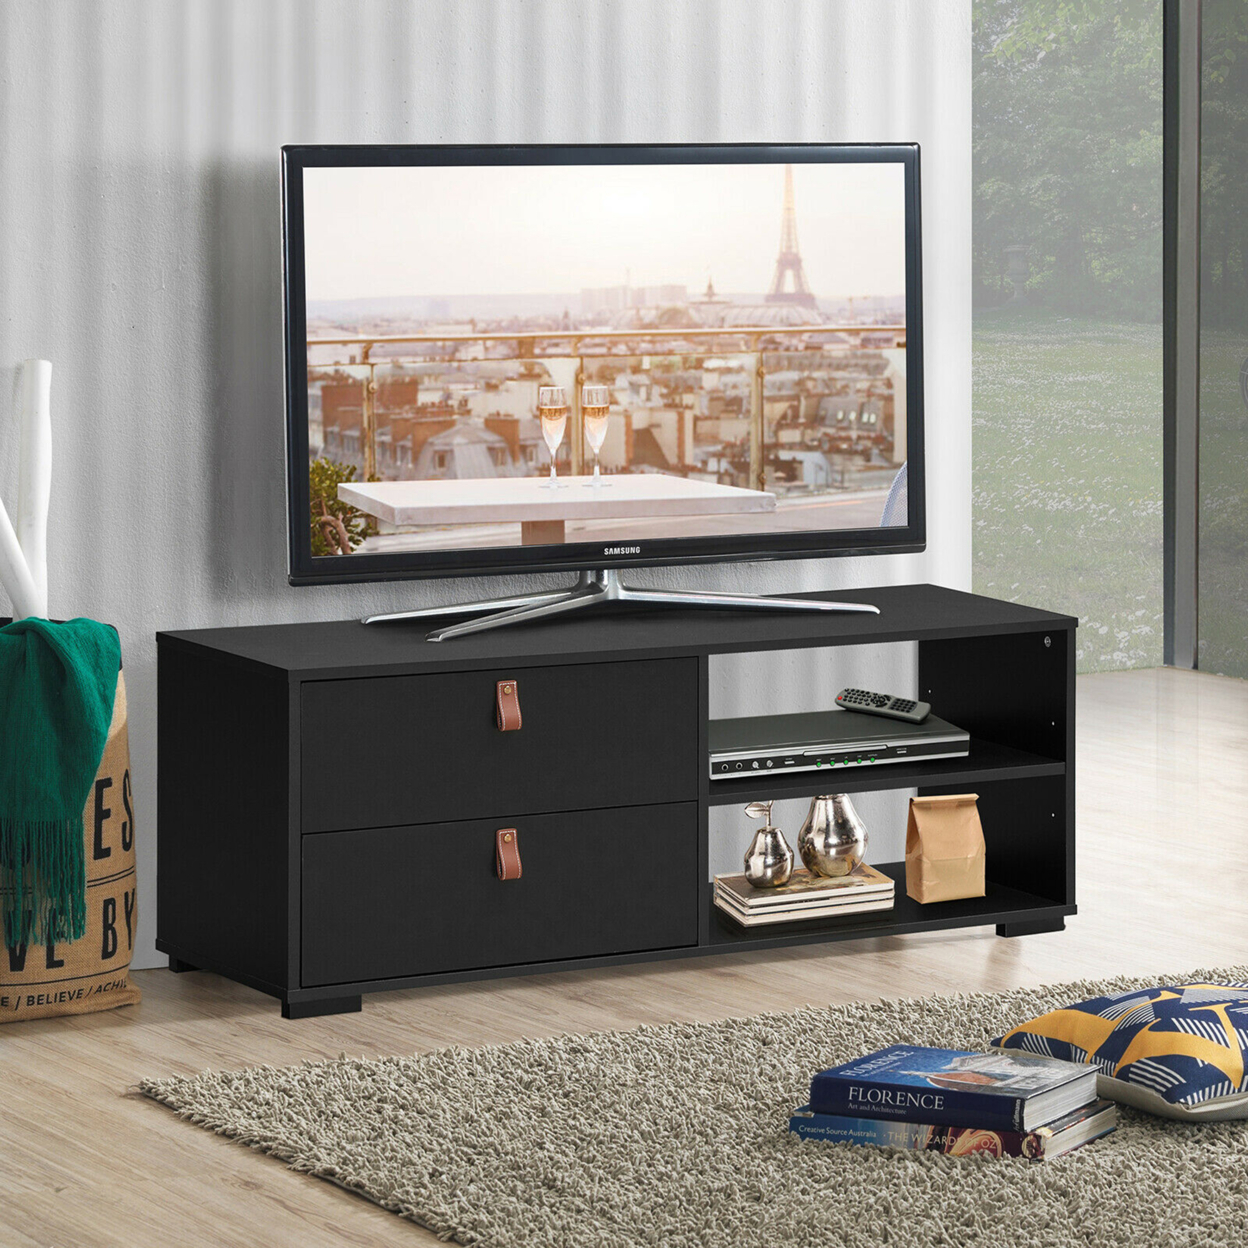 TV Stand Entertainment Media Center Console For TV's Up To 55'' W/Drawers Black/Walnut - Walnut